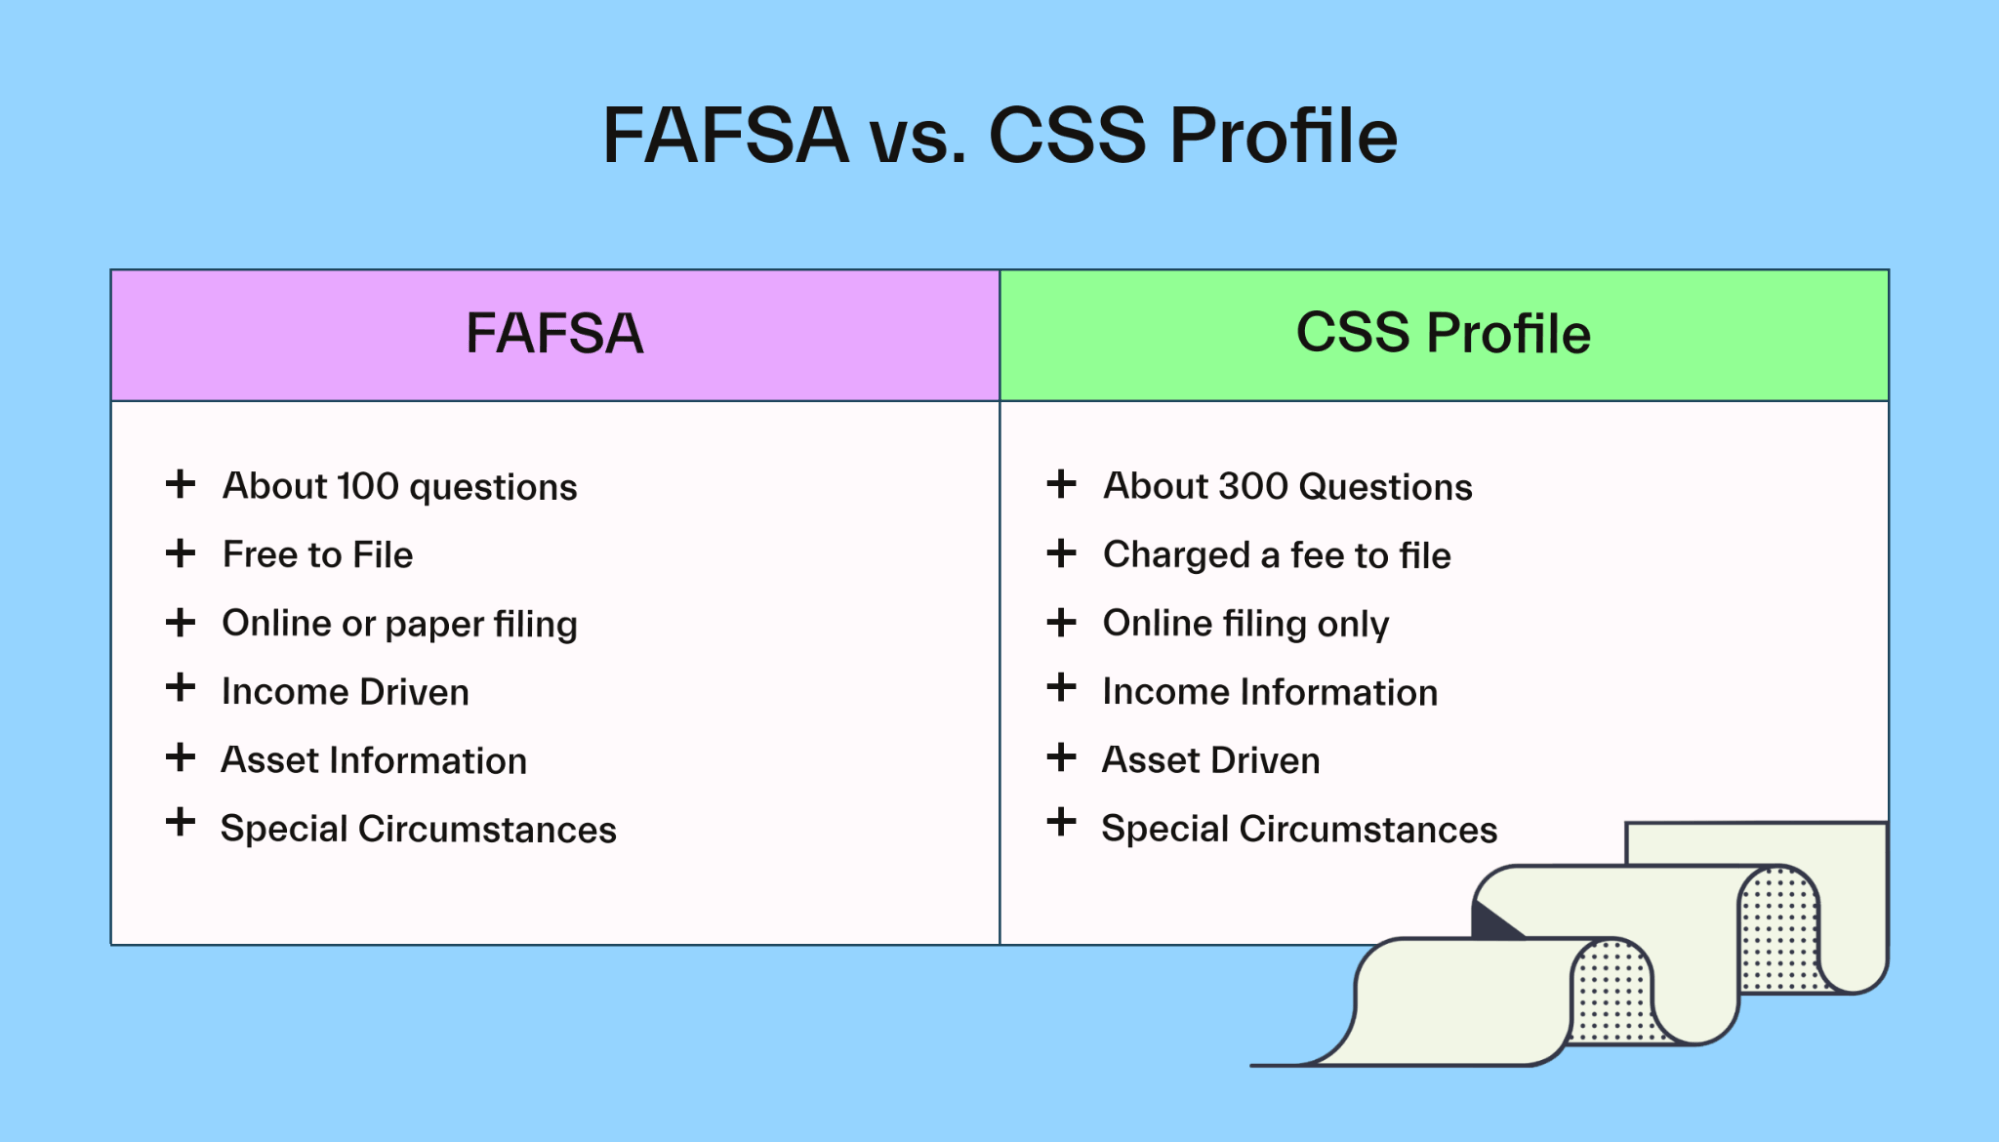 Differences Between FAFSA and CSS Profile